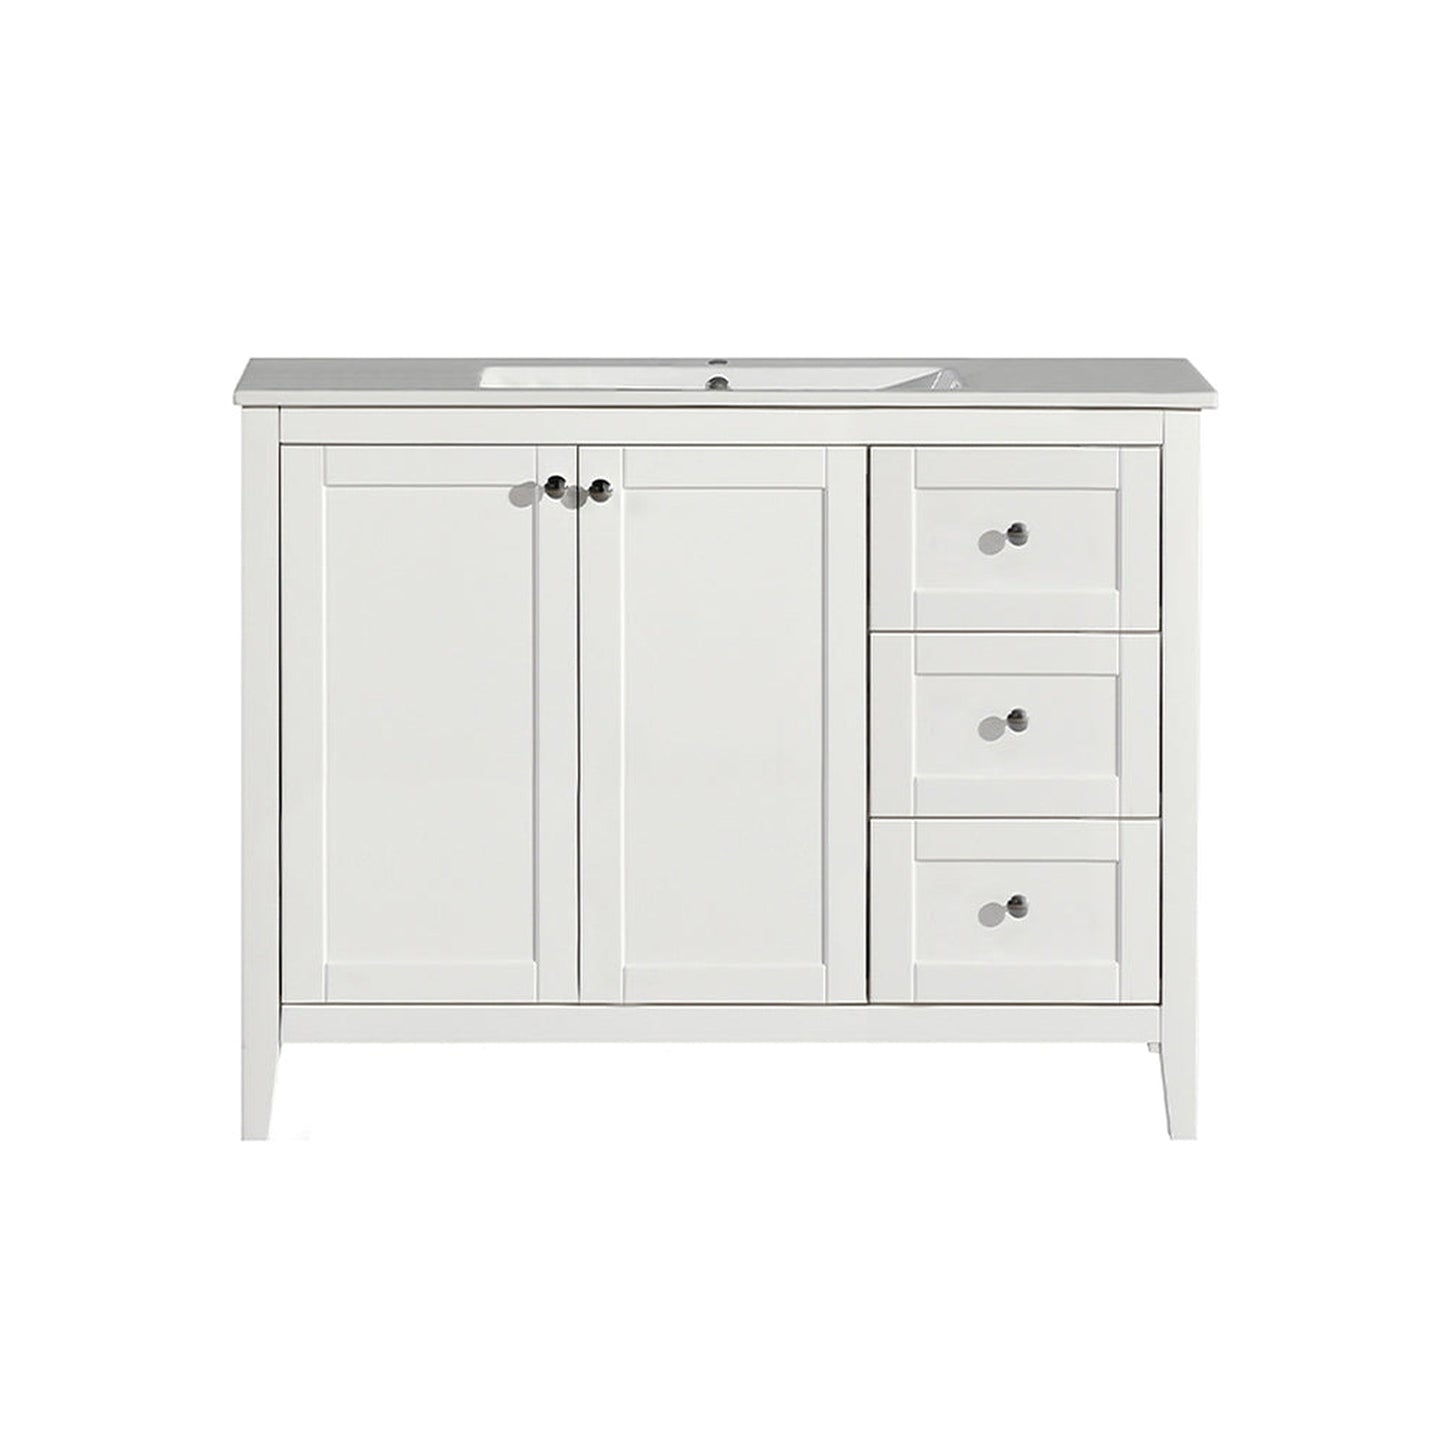 Swiss Madison Cannes 48" x 36" Freestanding Glossy White Bathroom Vanity With Ceramic Single Sink and Chrome Hardware